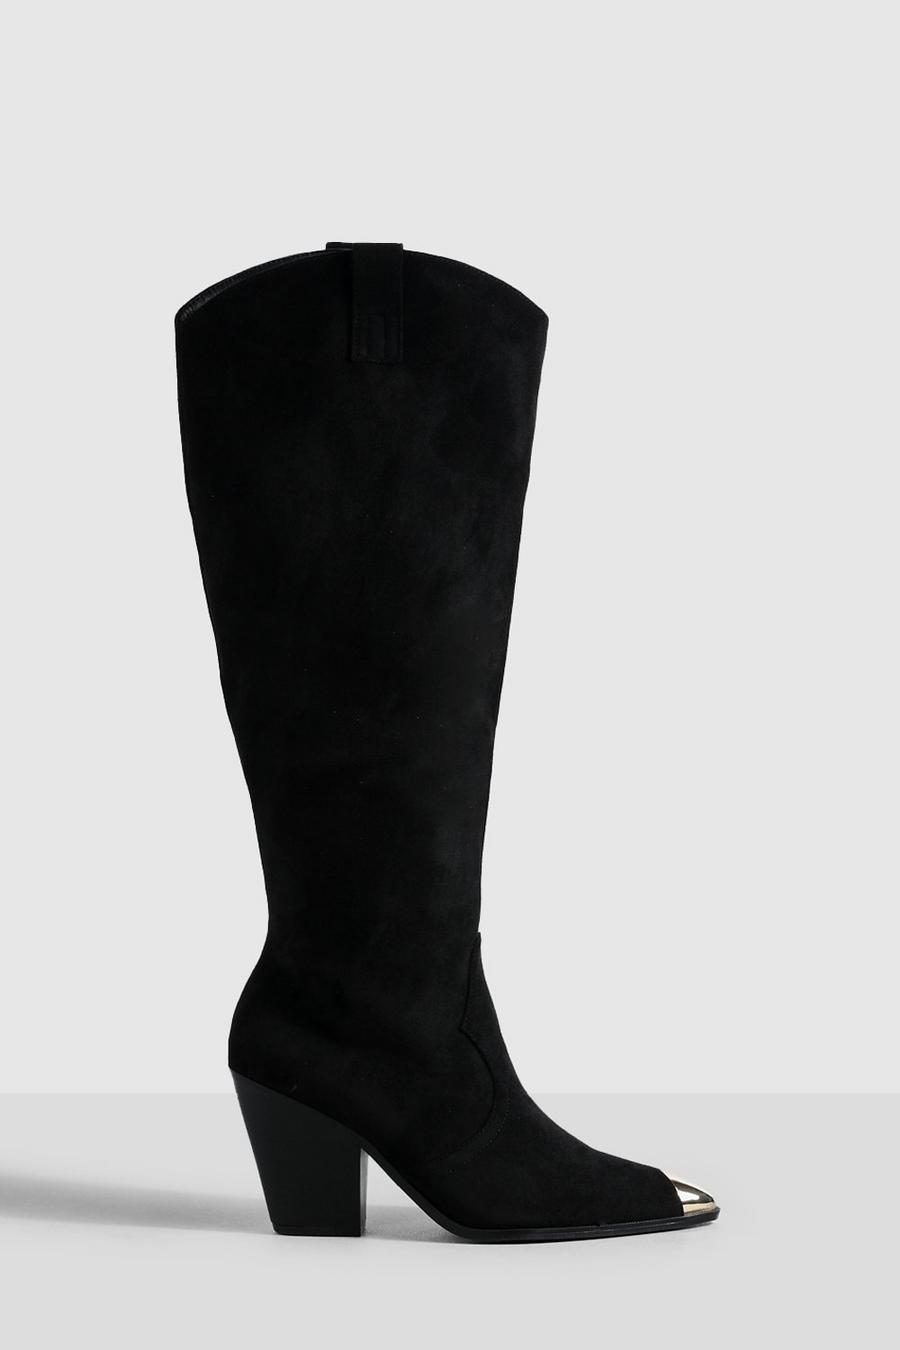 Black Knee High Toe Cap Pull On Western Cowboy Boots